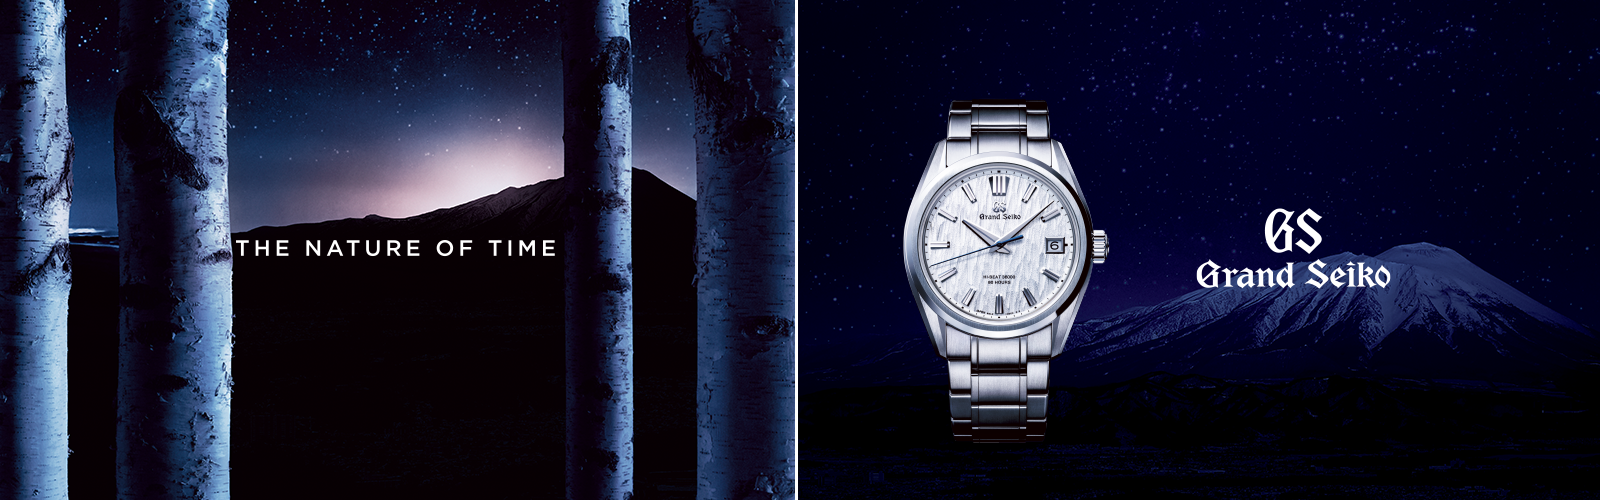 Grand Seiko-Recommendation on Watches | City Chain Official Website